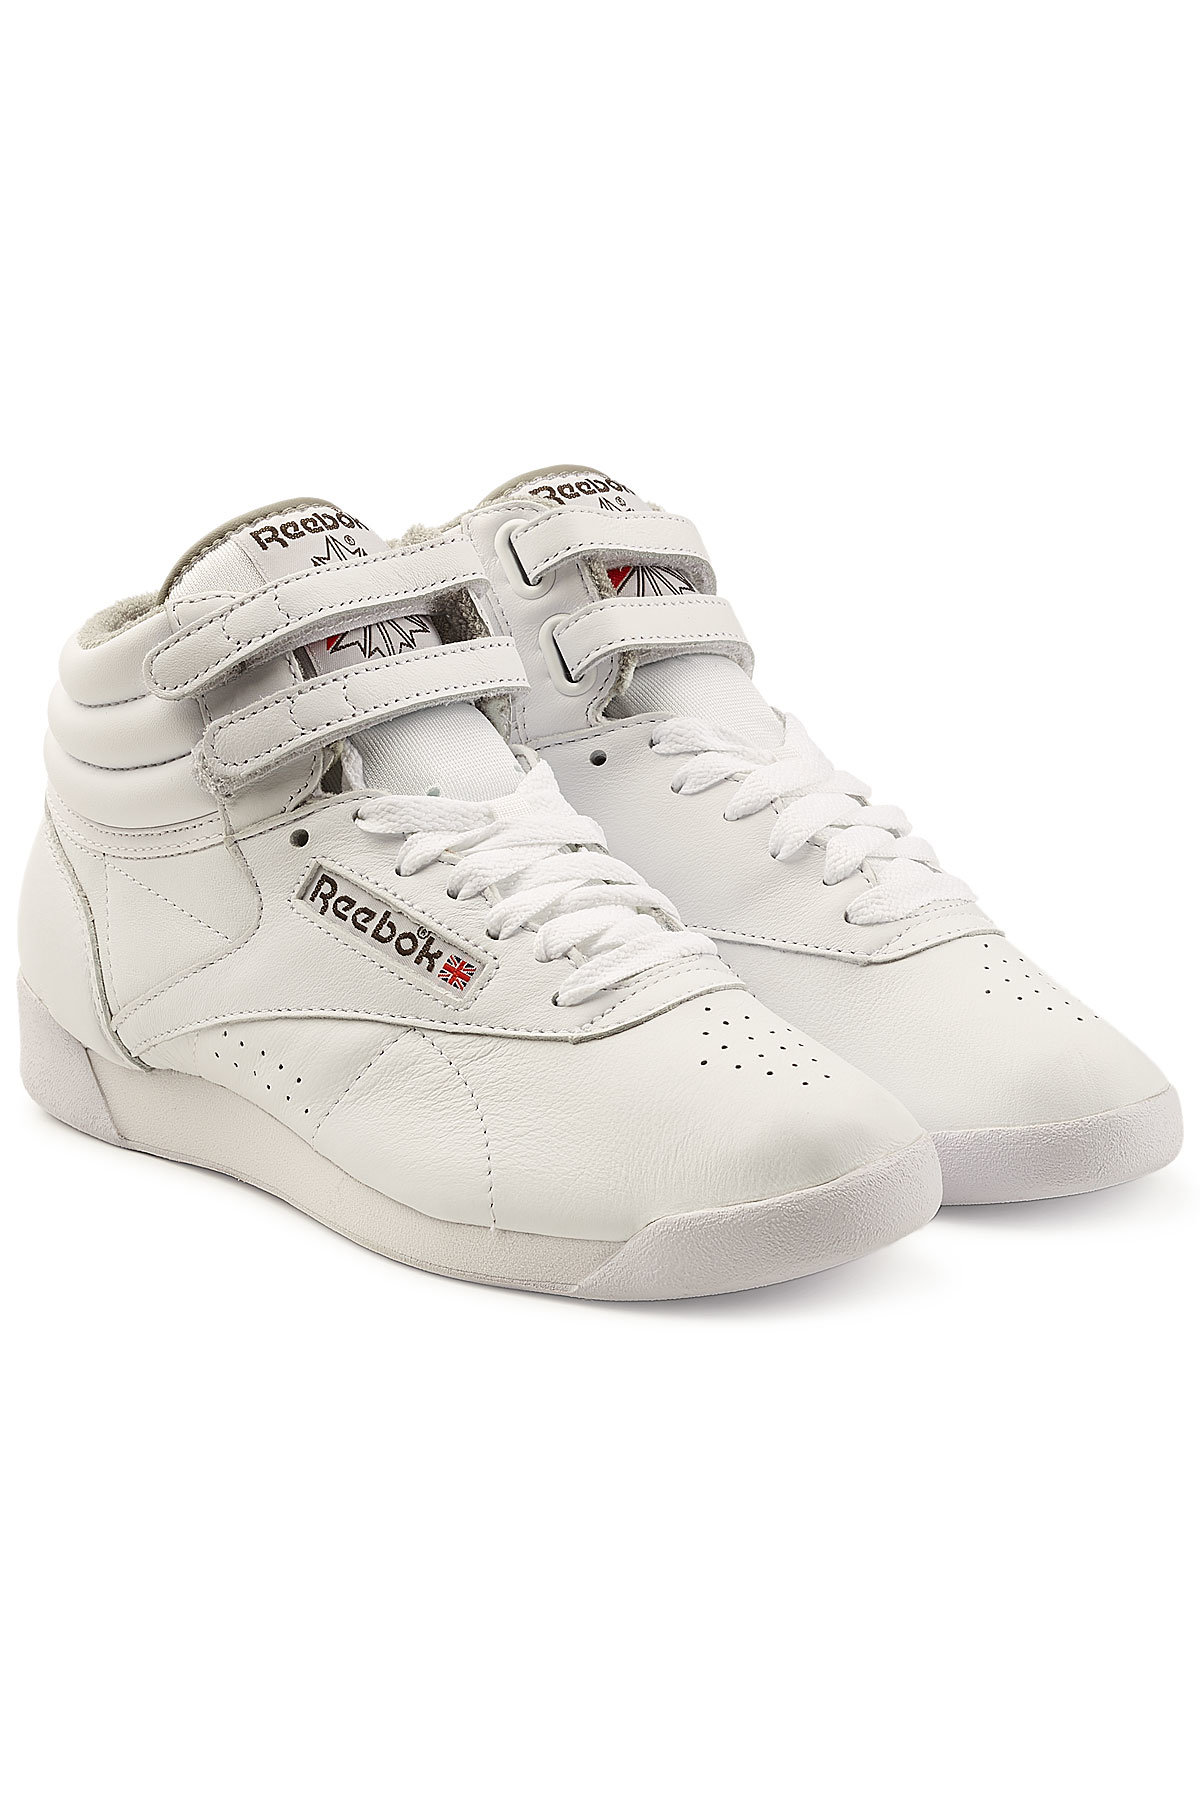 Freestyle Hi Leather Sneakers by Reebok